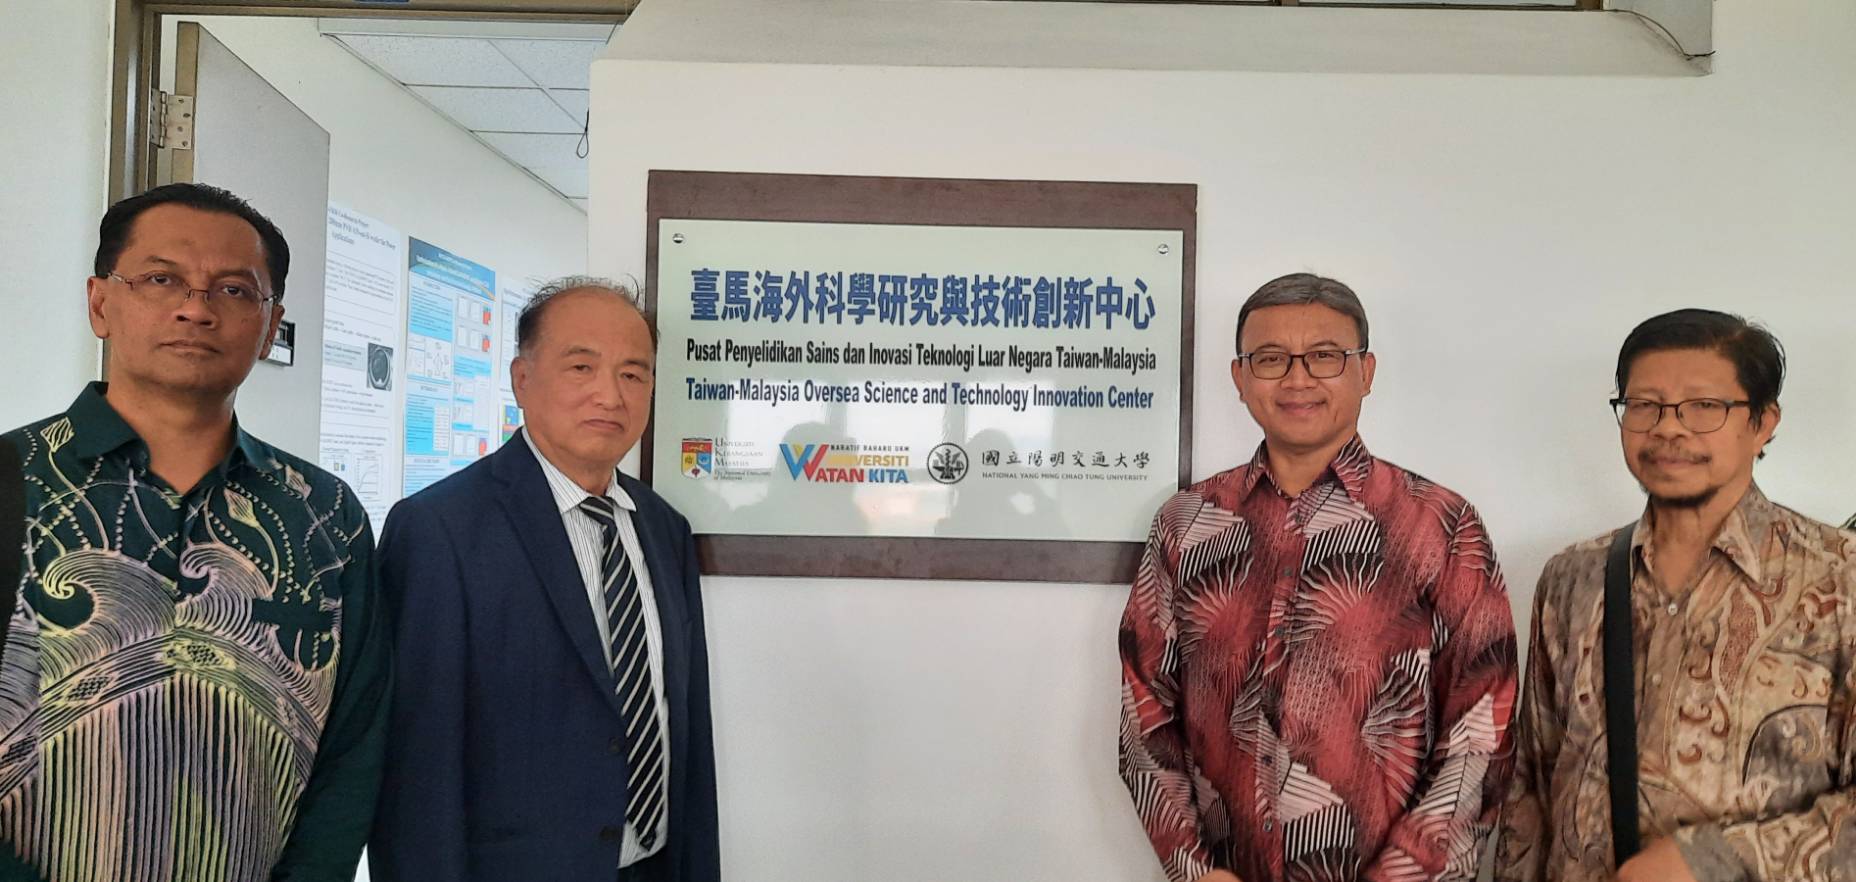 Taiwan-Malaysia Oversea Science and Technology Innovation Center Open Ceremony's pic